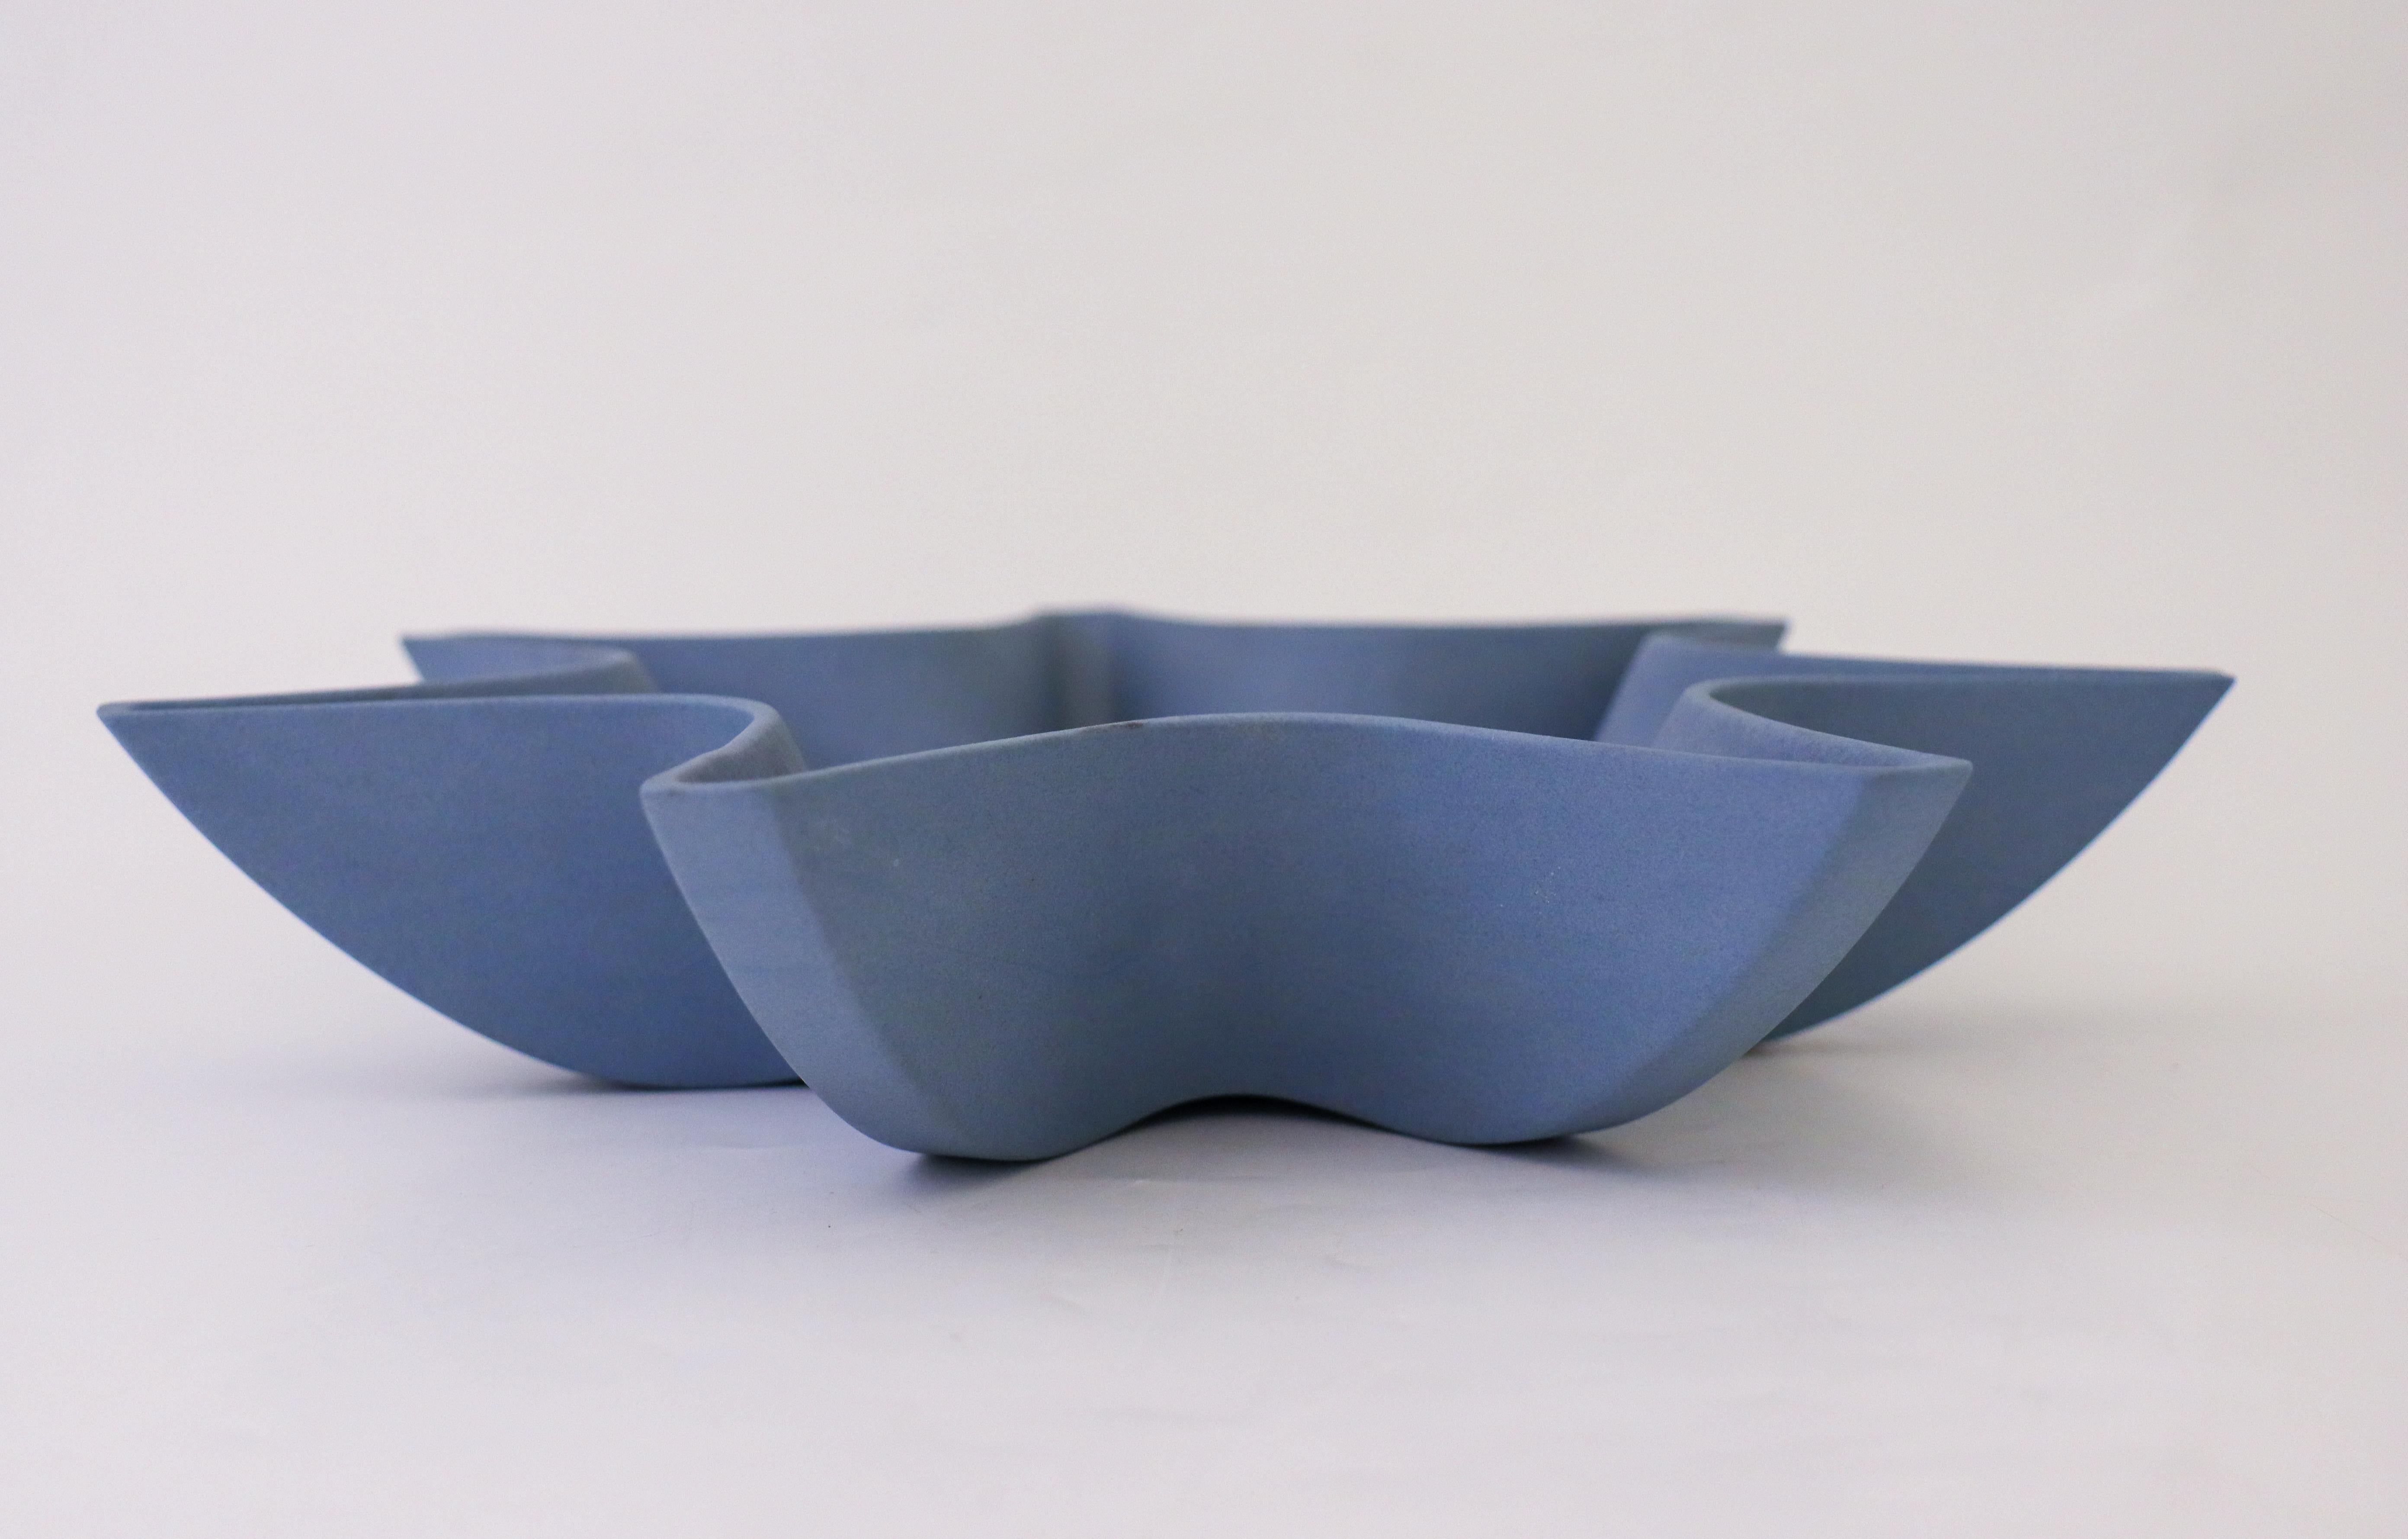 A star shaped blue bowl designed by Pia Rönndahl at Rörstrand in the 1996. The bowl is 29 cm (11.6